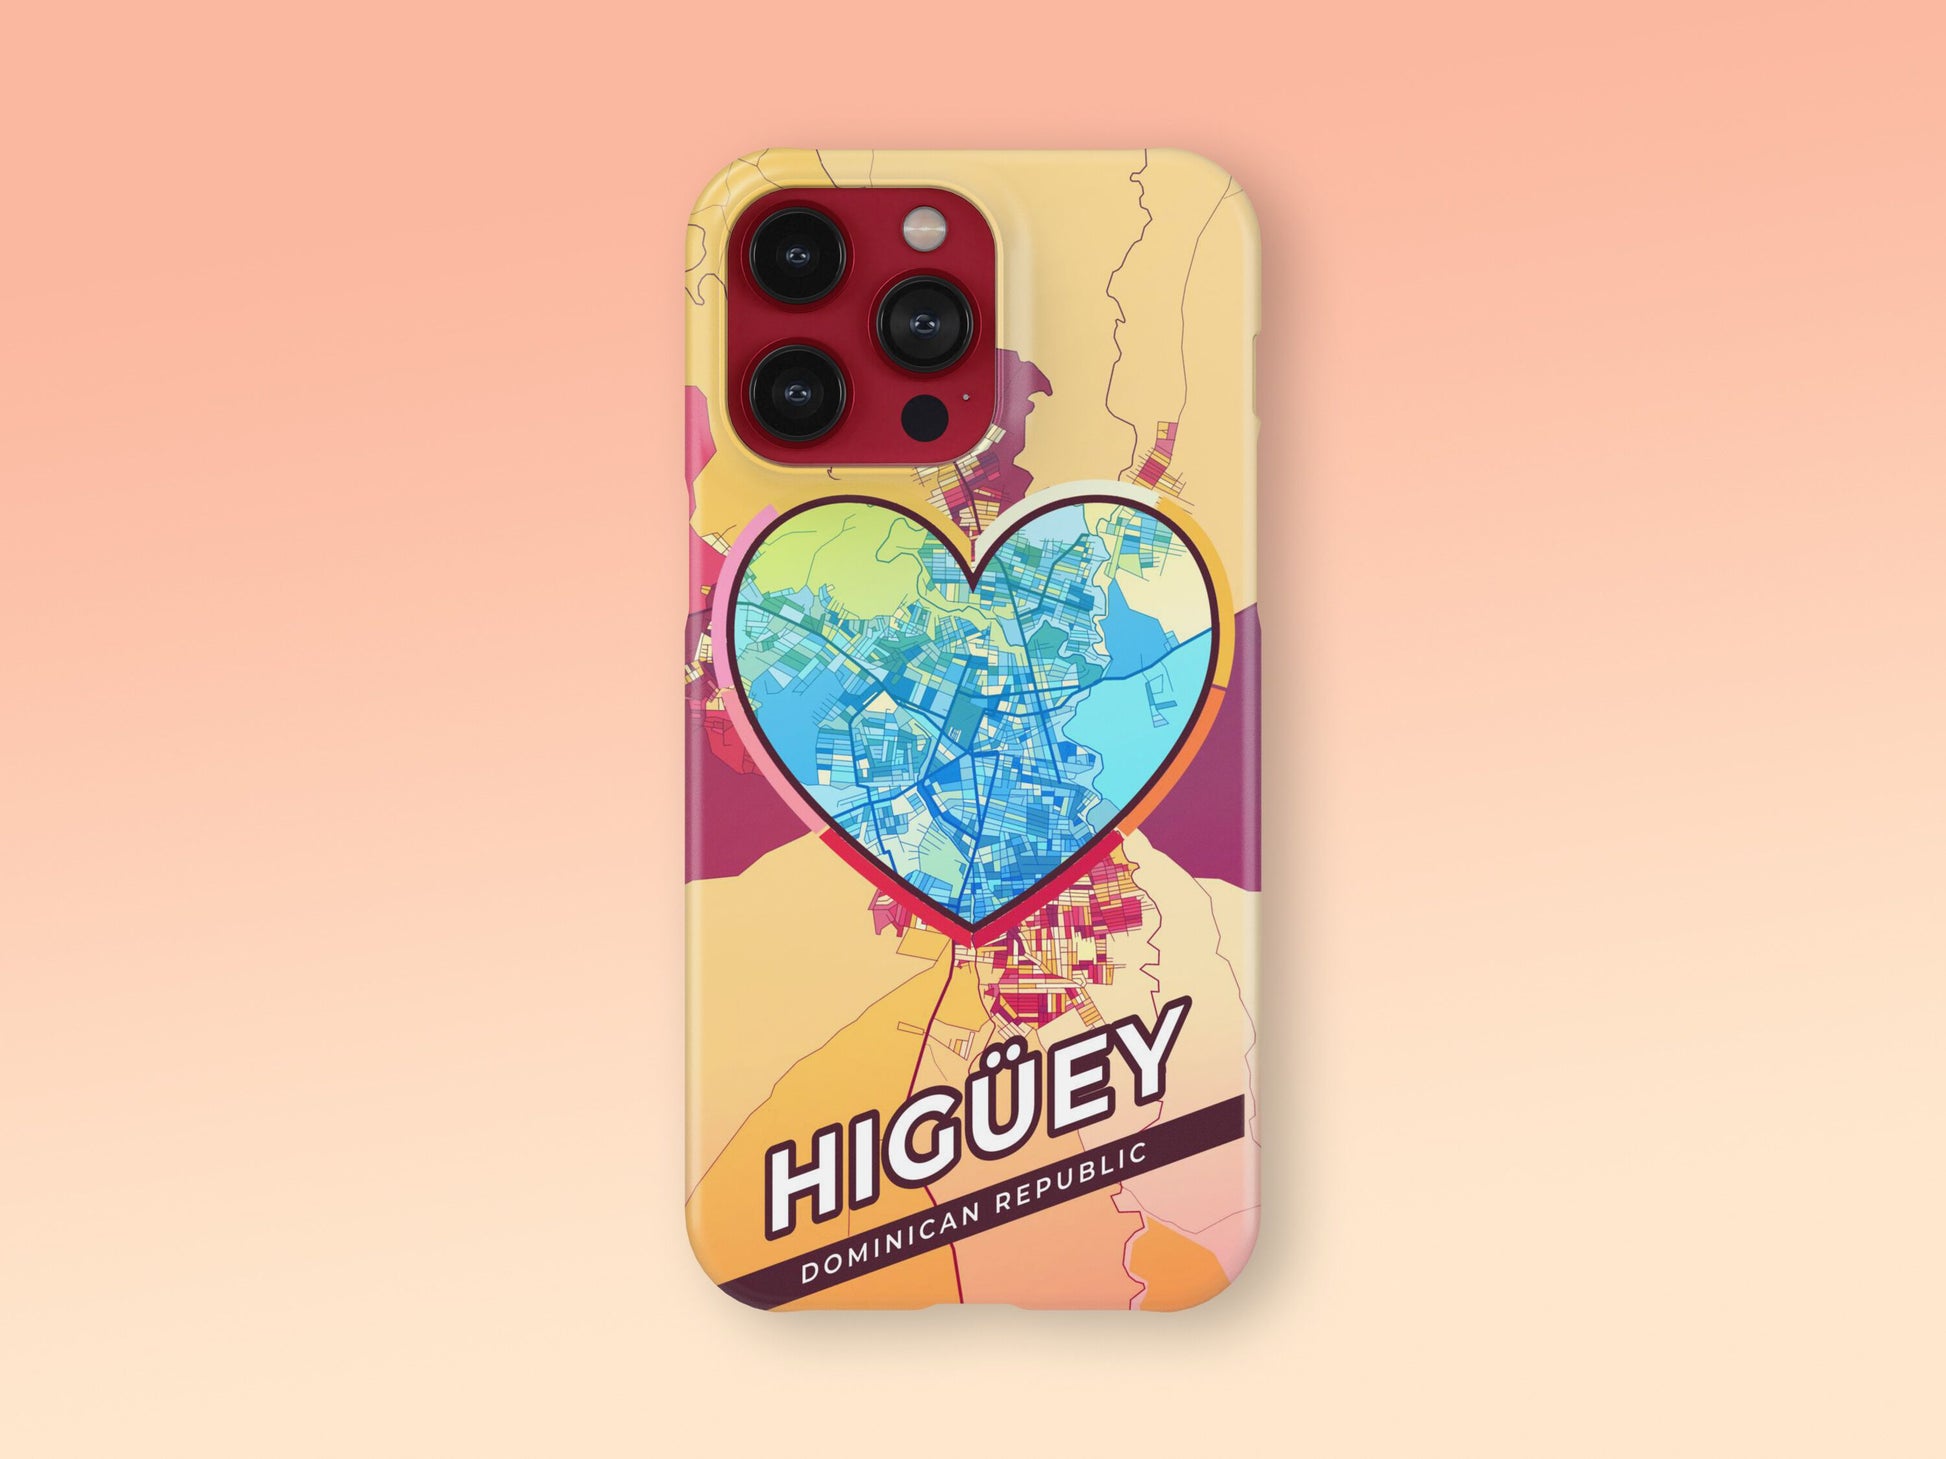 Higüey Dominican Republic slim phone case with colorful icon. Birthday, wedding or housewarming gift. Couple match cases. 2